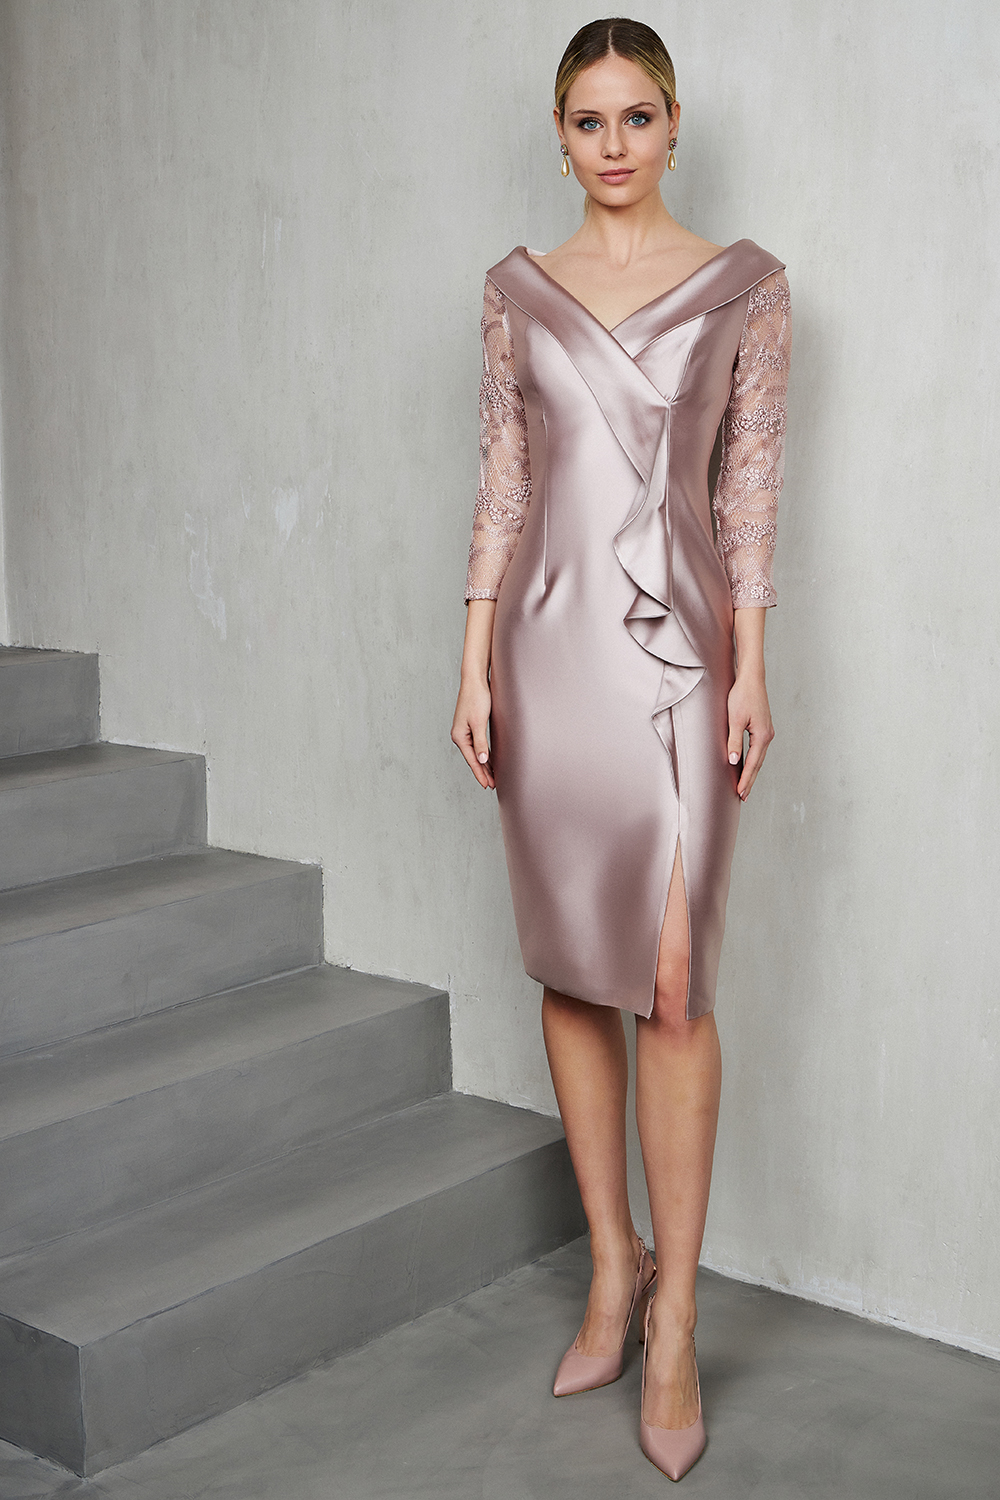 Short evening satin dress with lace on the sleeves for the mother of the bride